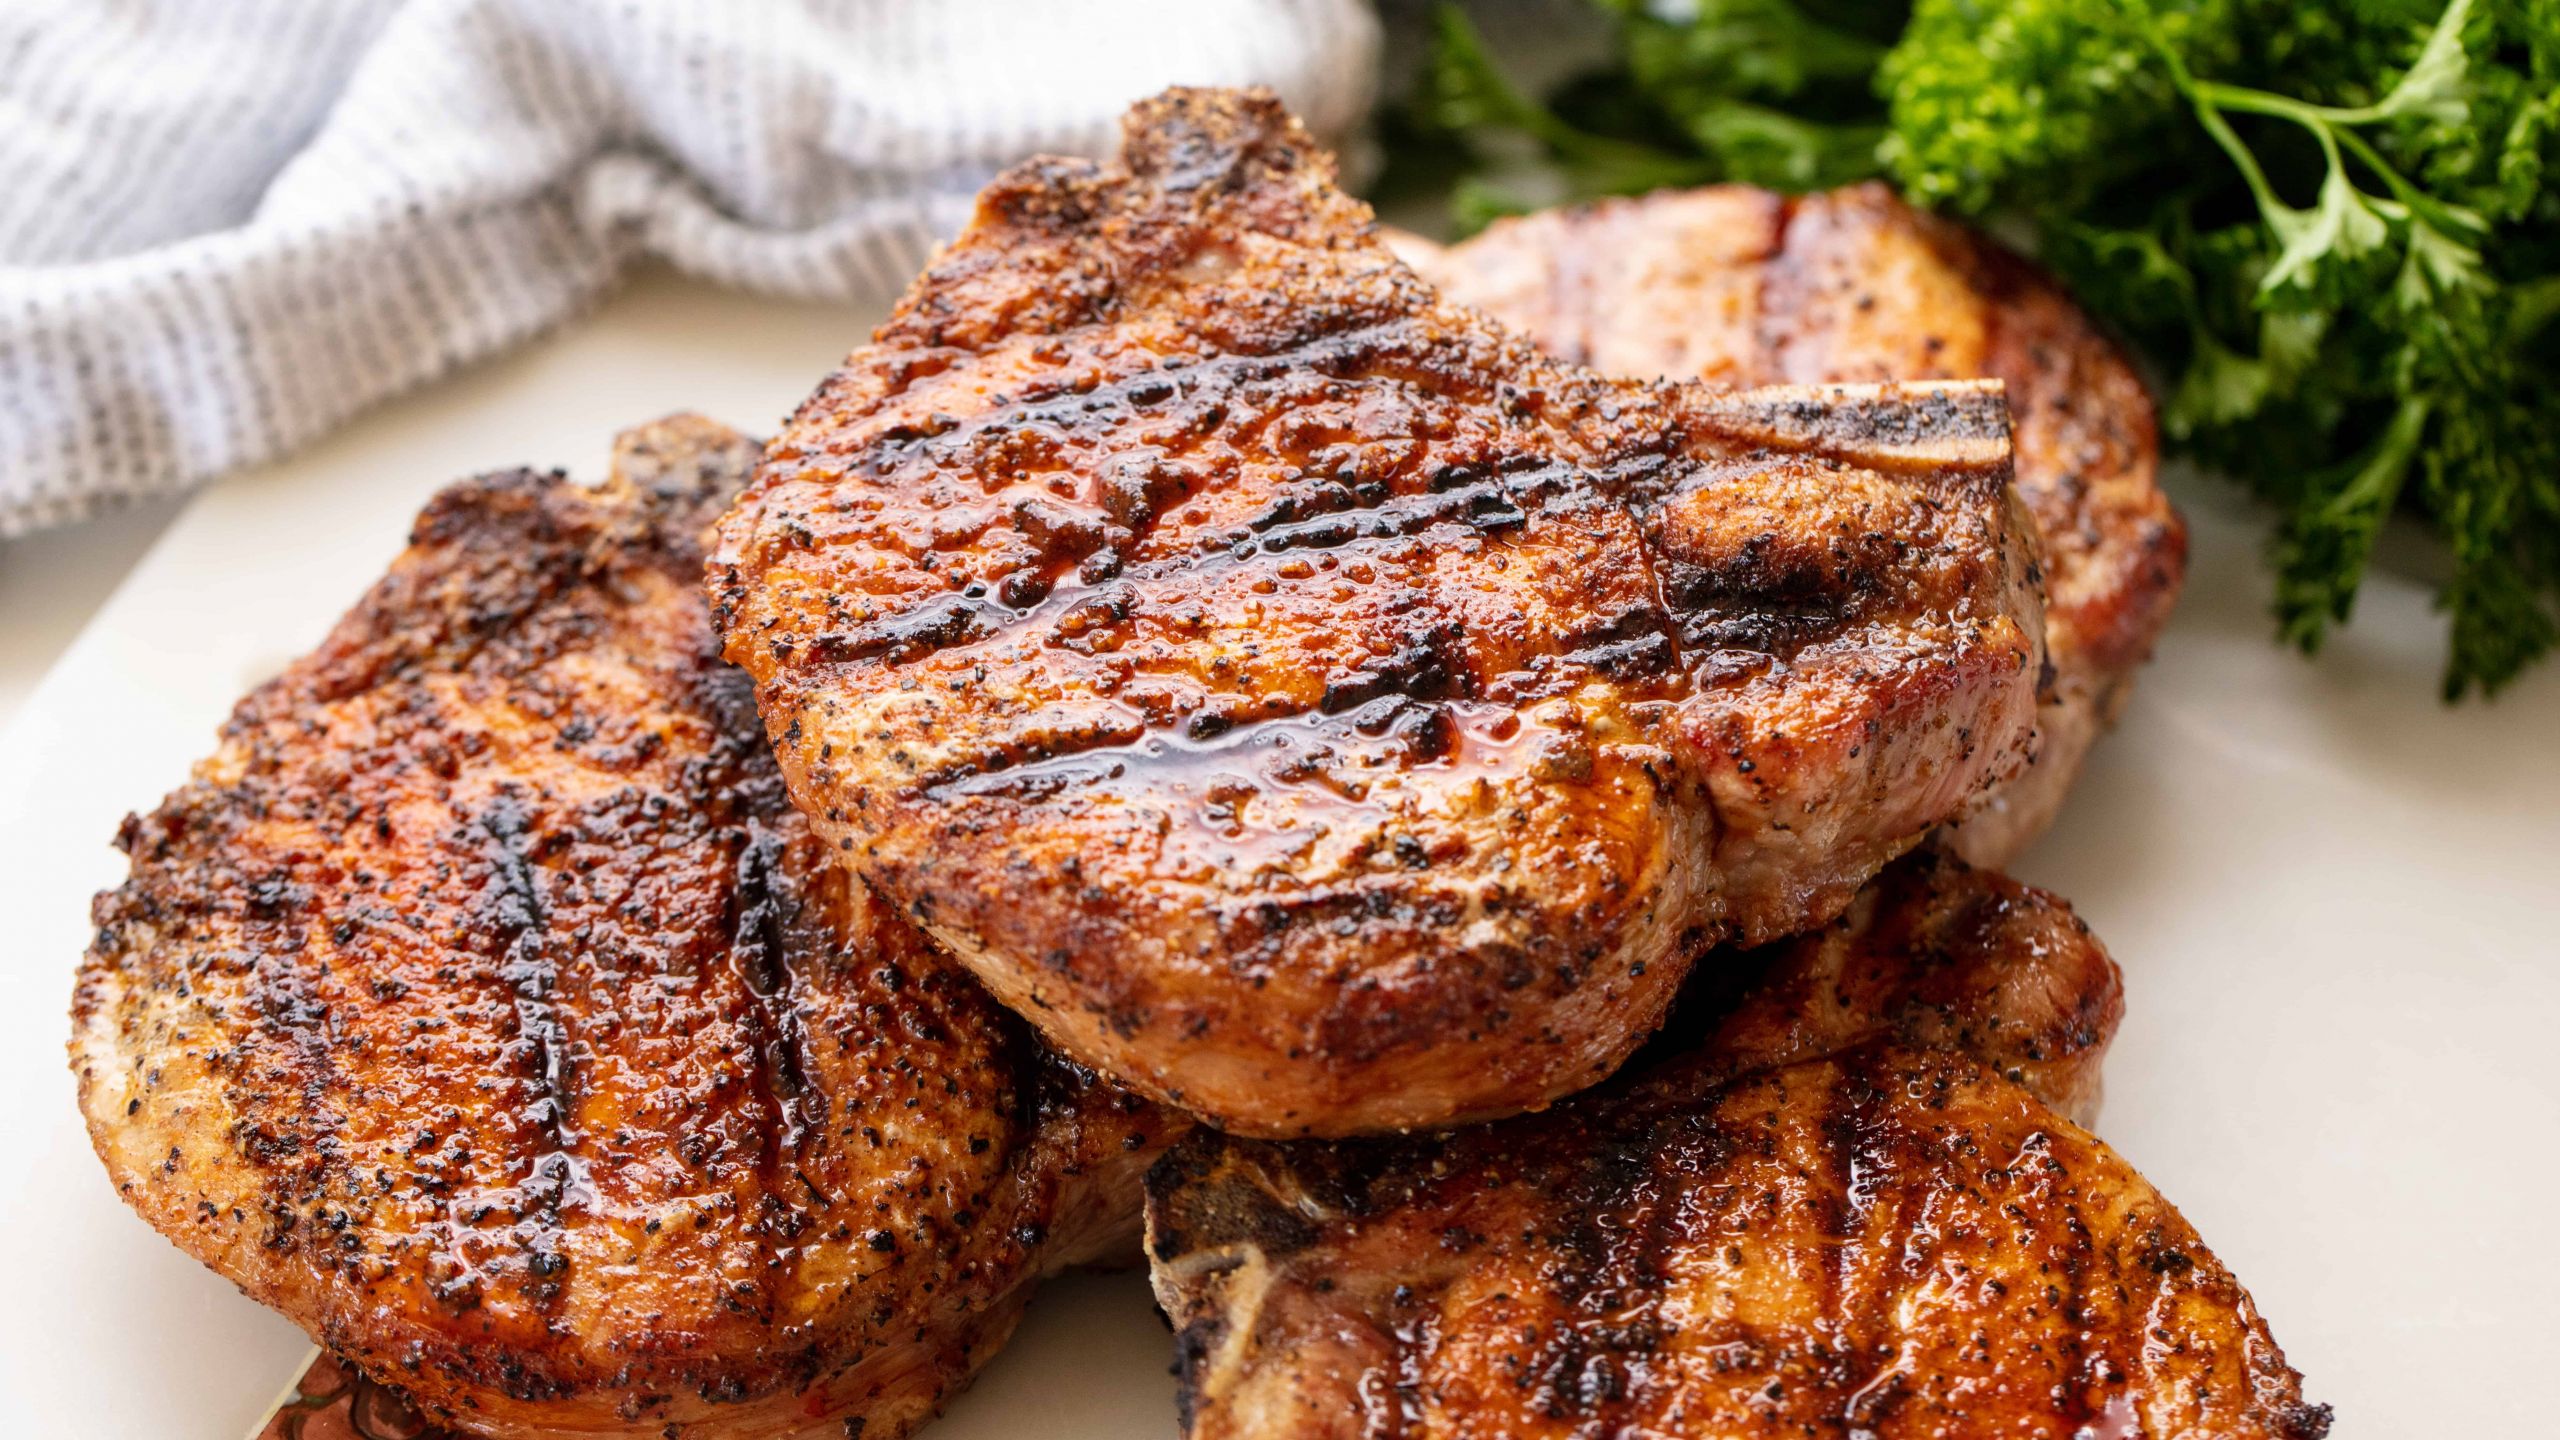 Grill Pork Loin Chops Inspirational Perfect Grilled Pork Chops